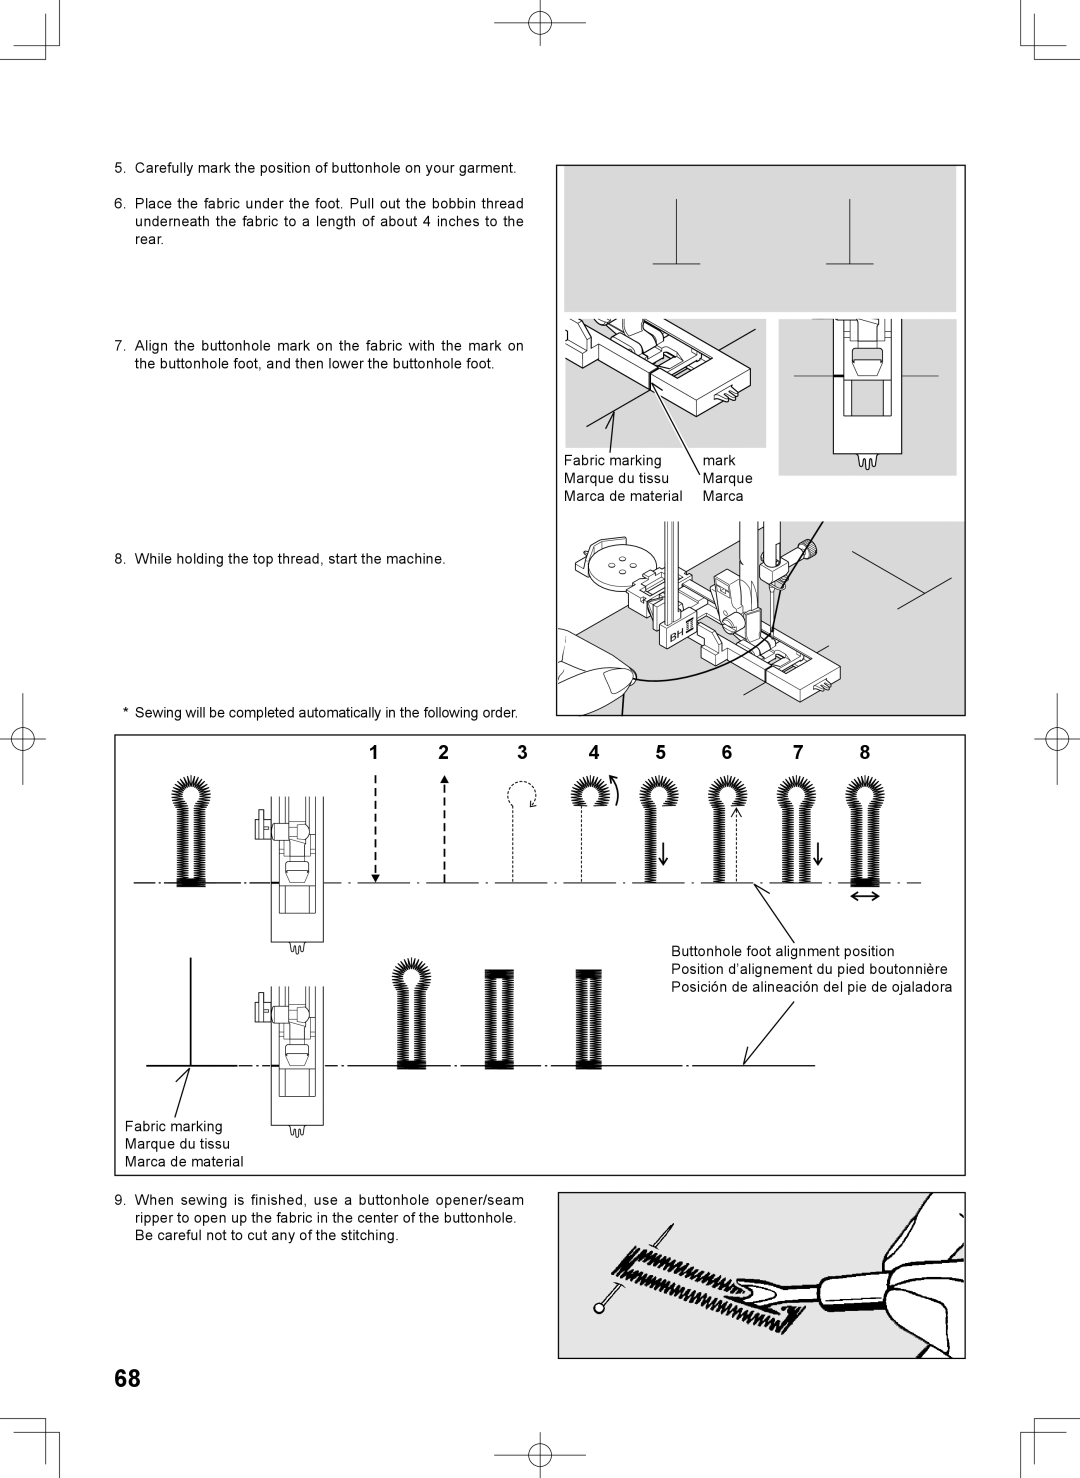 Singer 7467S instruction manual Carefully mark the position of buttonhole on your garment 